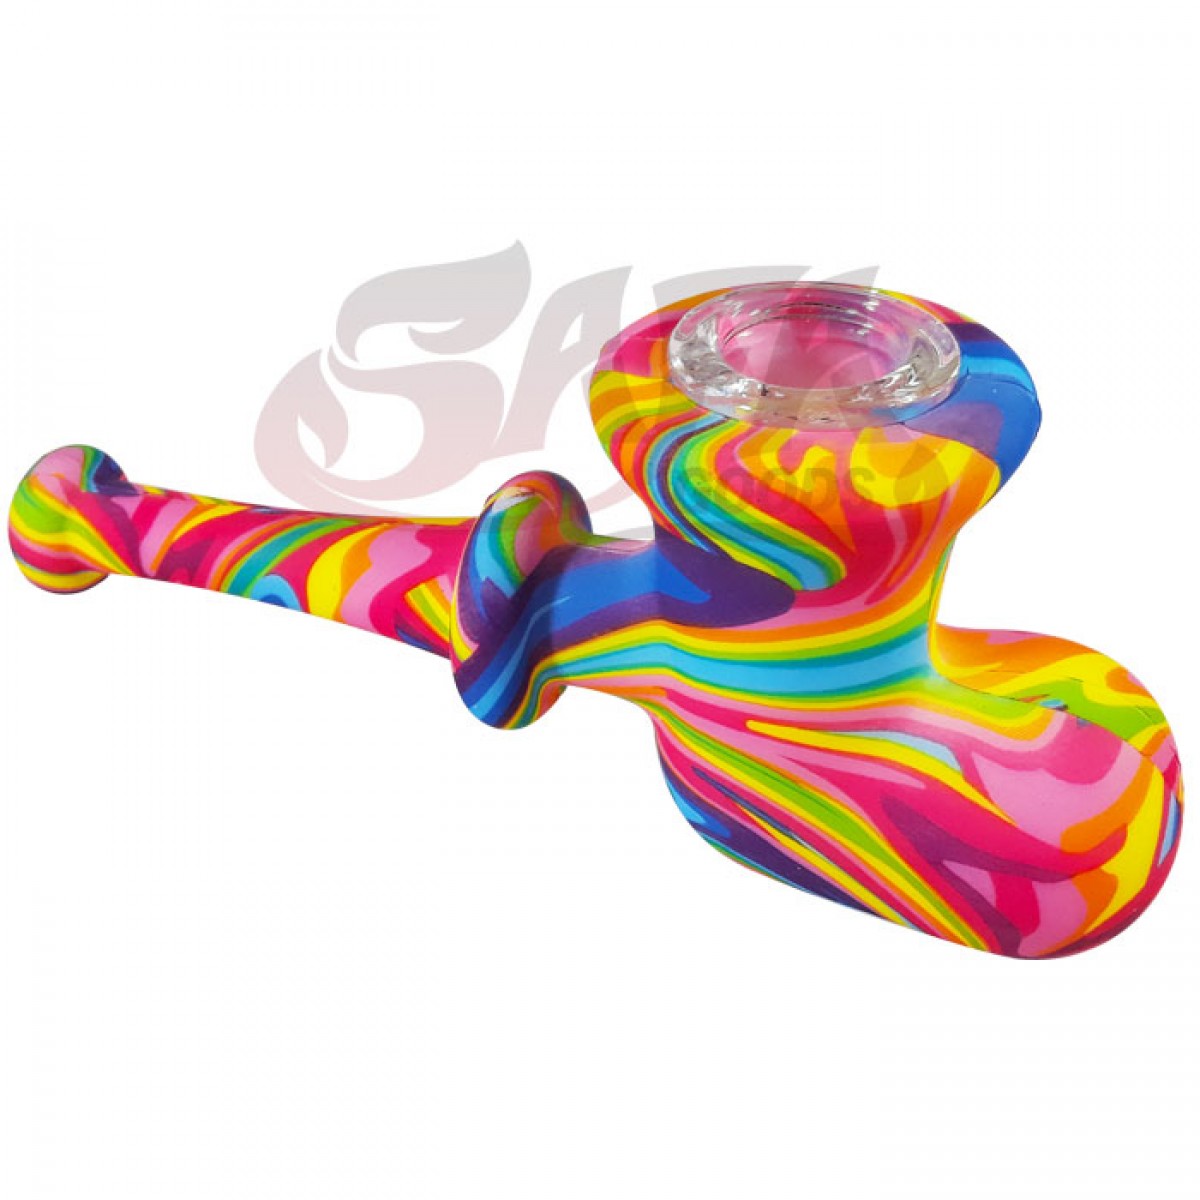 Toke Buddy Snow Boot Silicone Hand Pipe